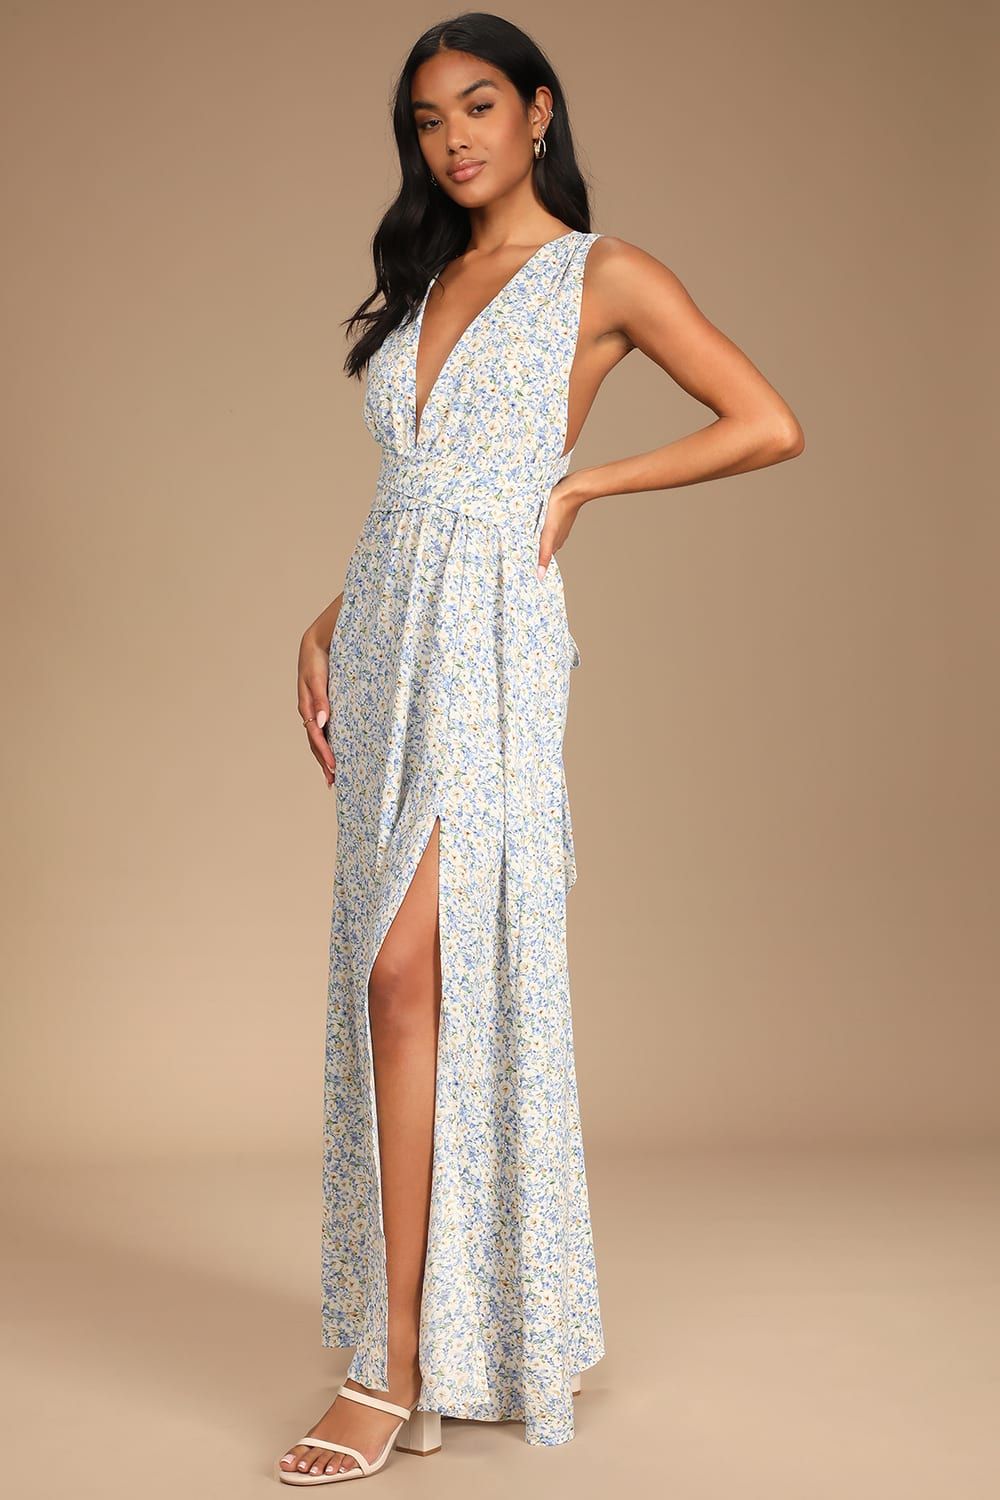 These are the Days Blue Floral Print Halter Maxi Dress | Lulus (US)